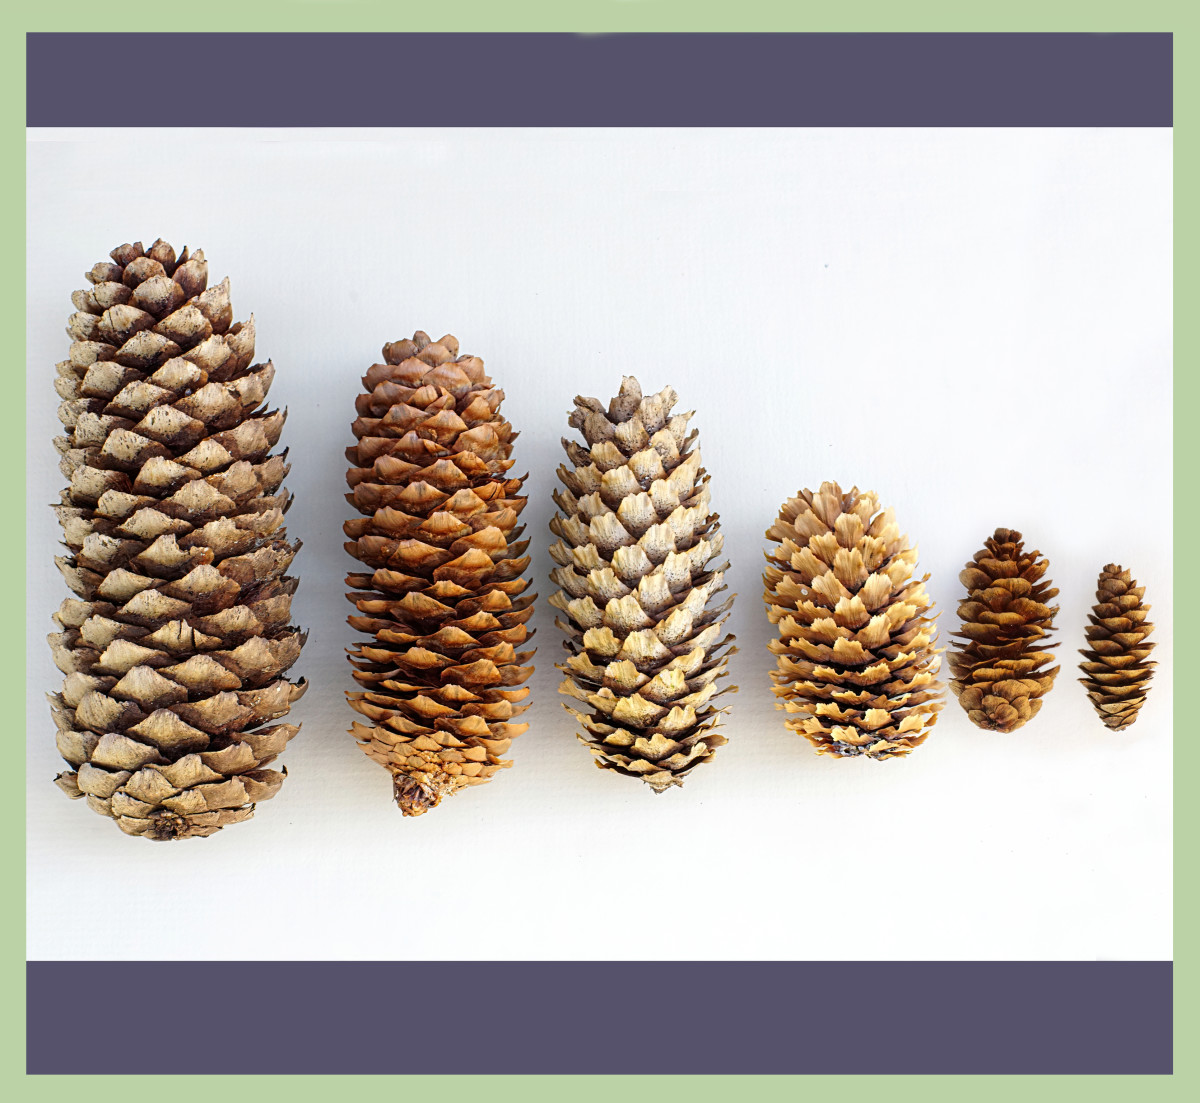 Comparing Spruce seed cones: 2 Left - Norway Spruce; 2 Middle - Blue Spruce; 2 Right - White Spruce 